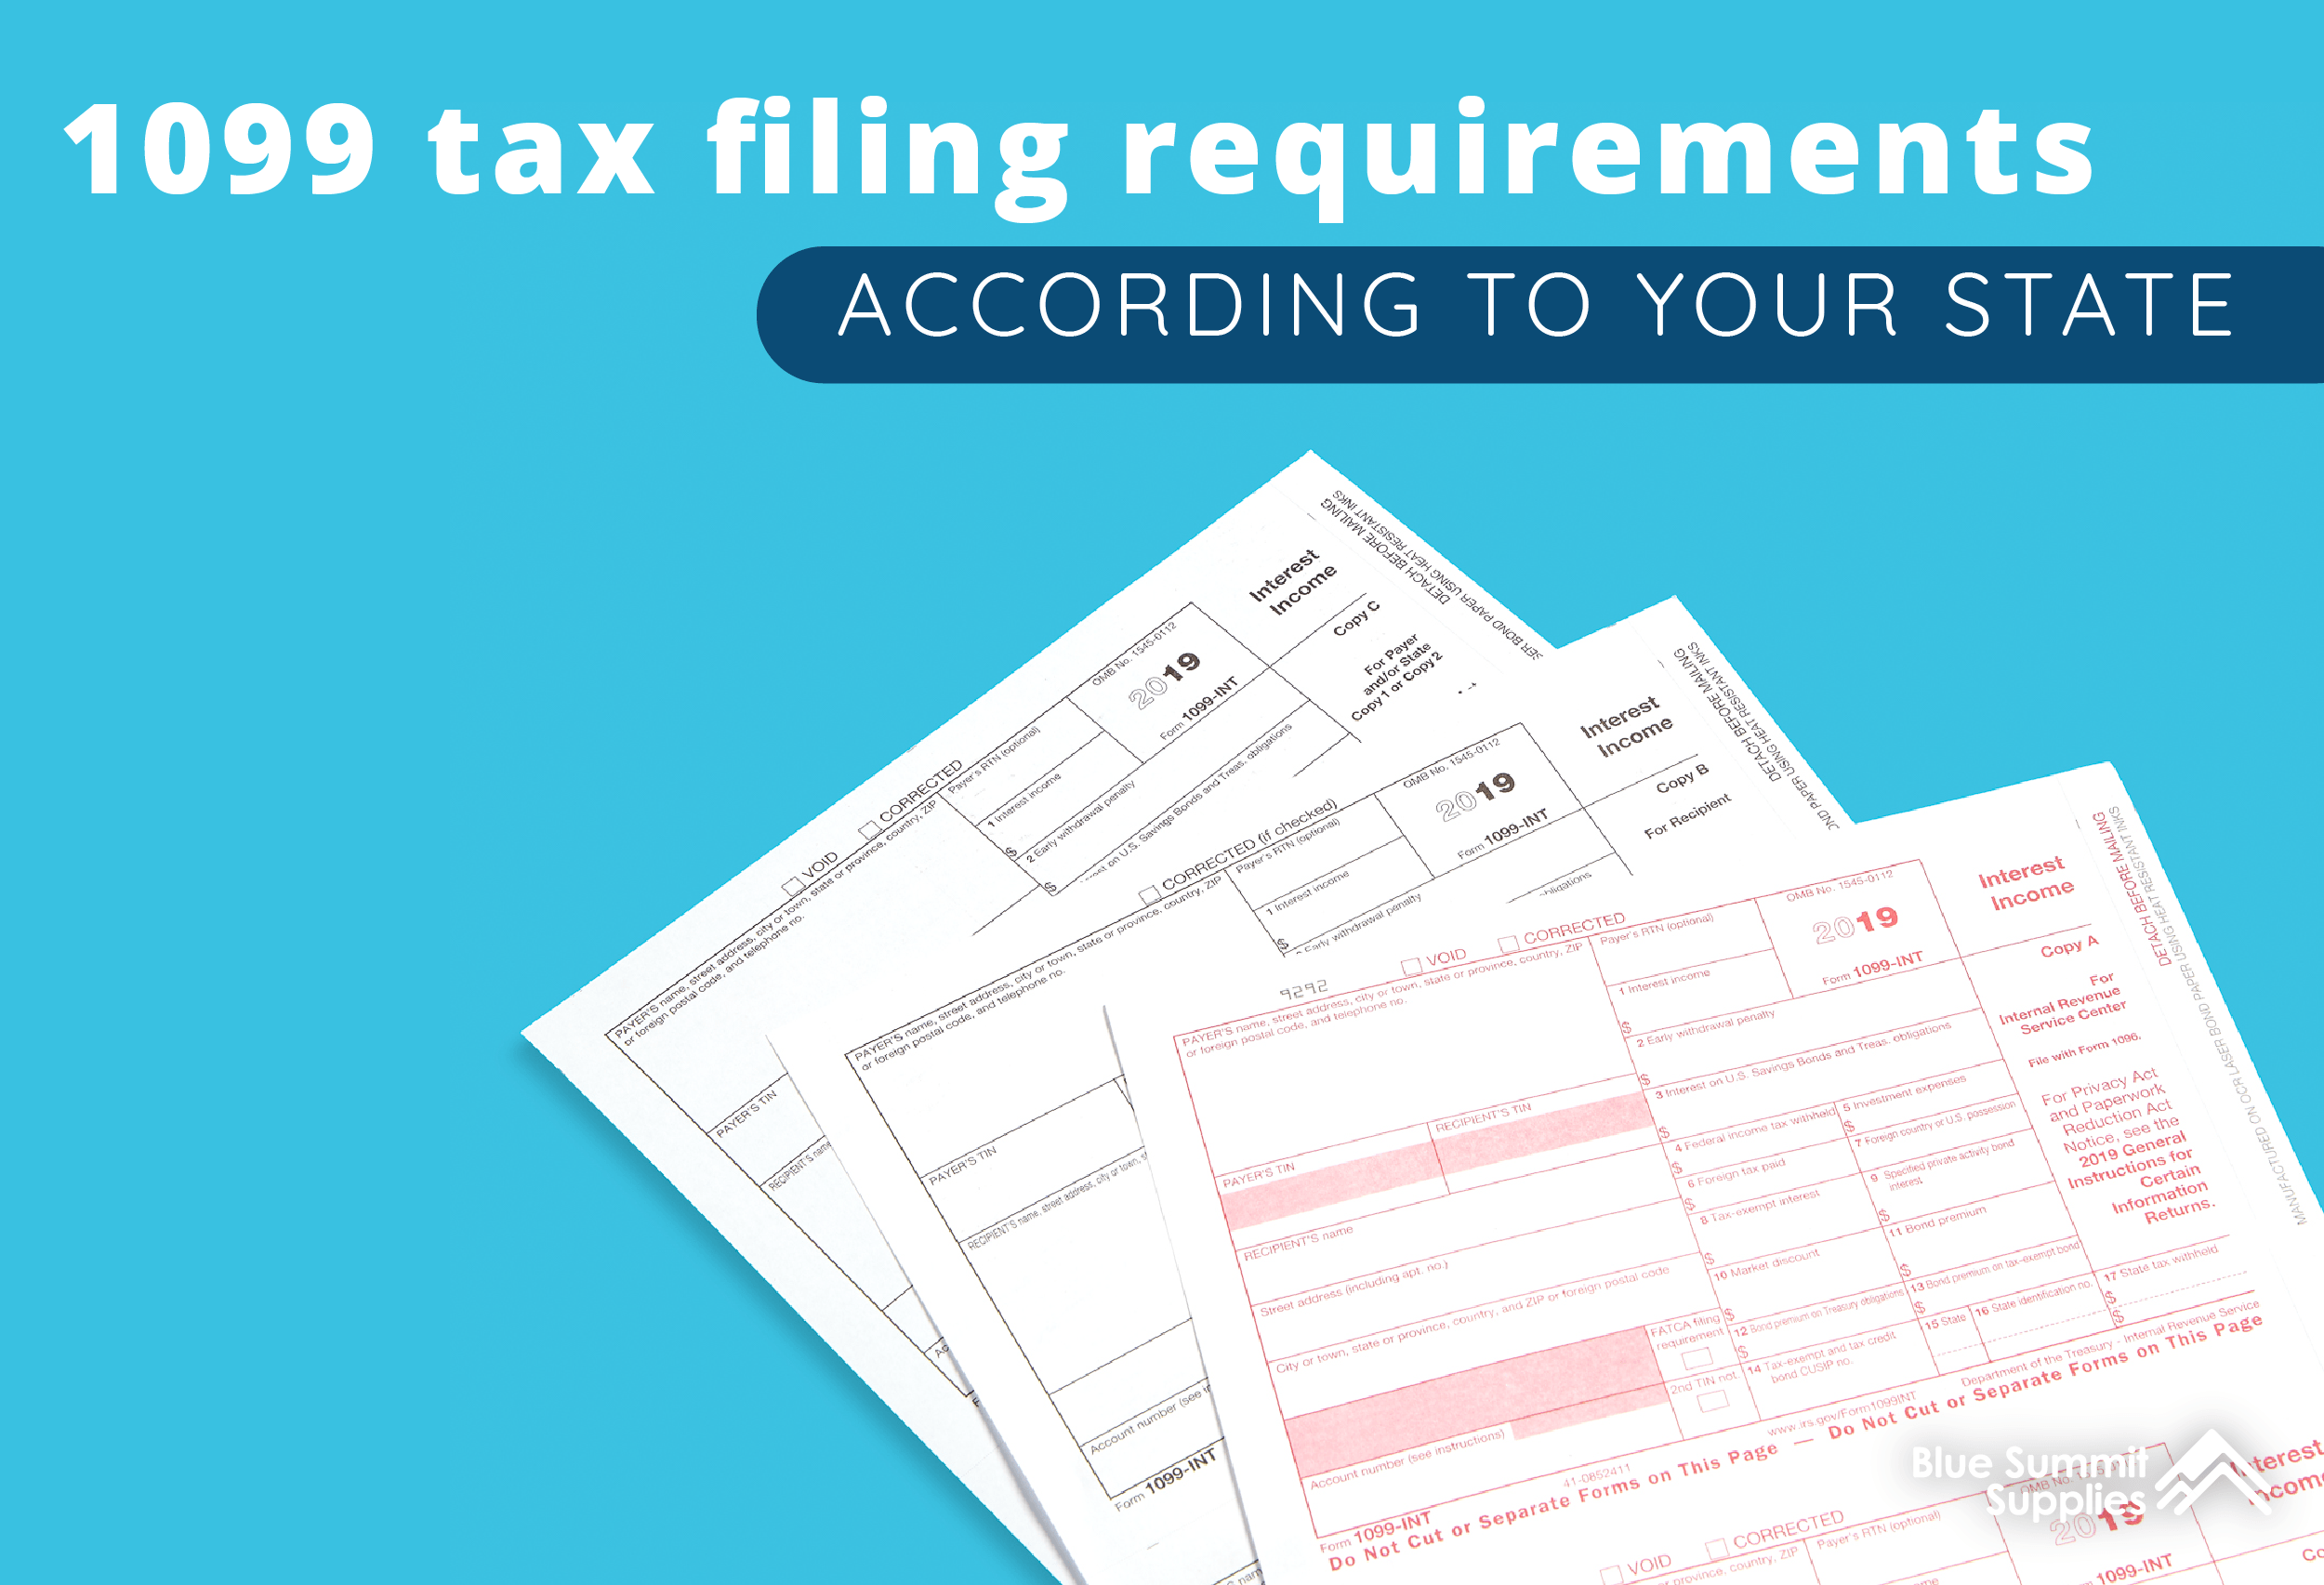 1099 Tax Filing Requirements According to Your State